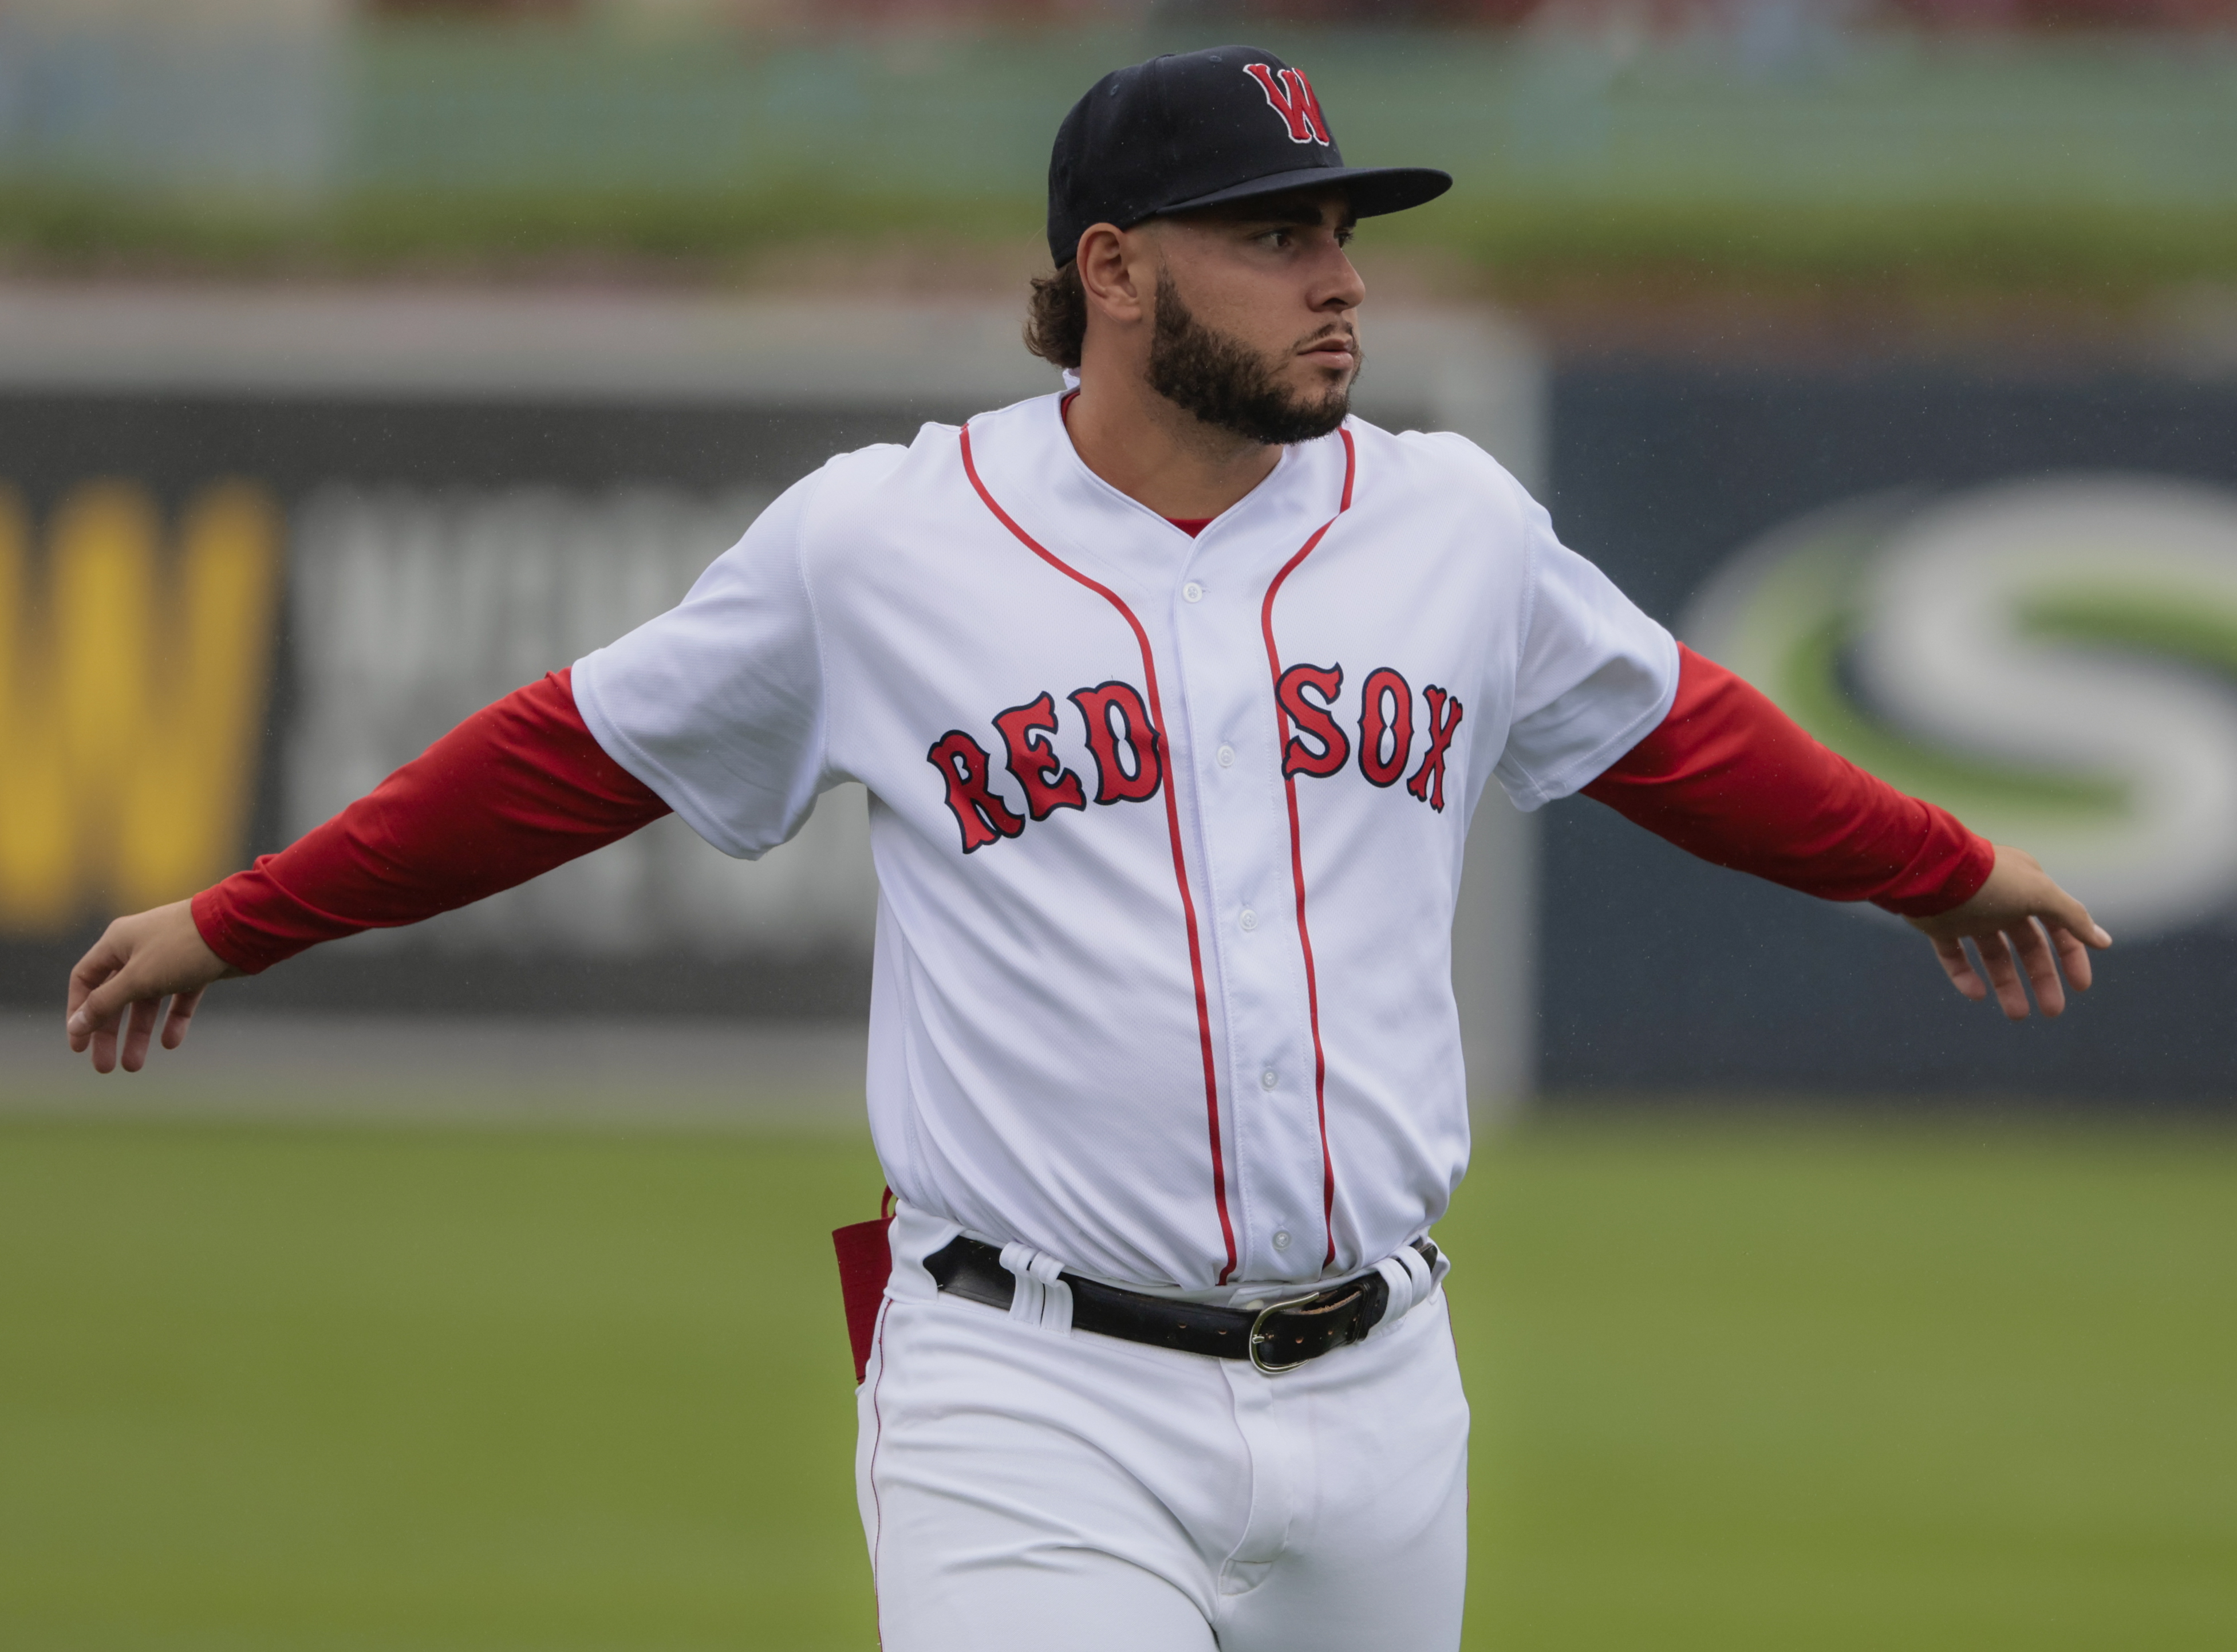 Gallery: Red Sox blow lead and lose big to Astros 13-5 – Boston Herald